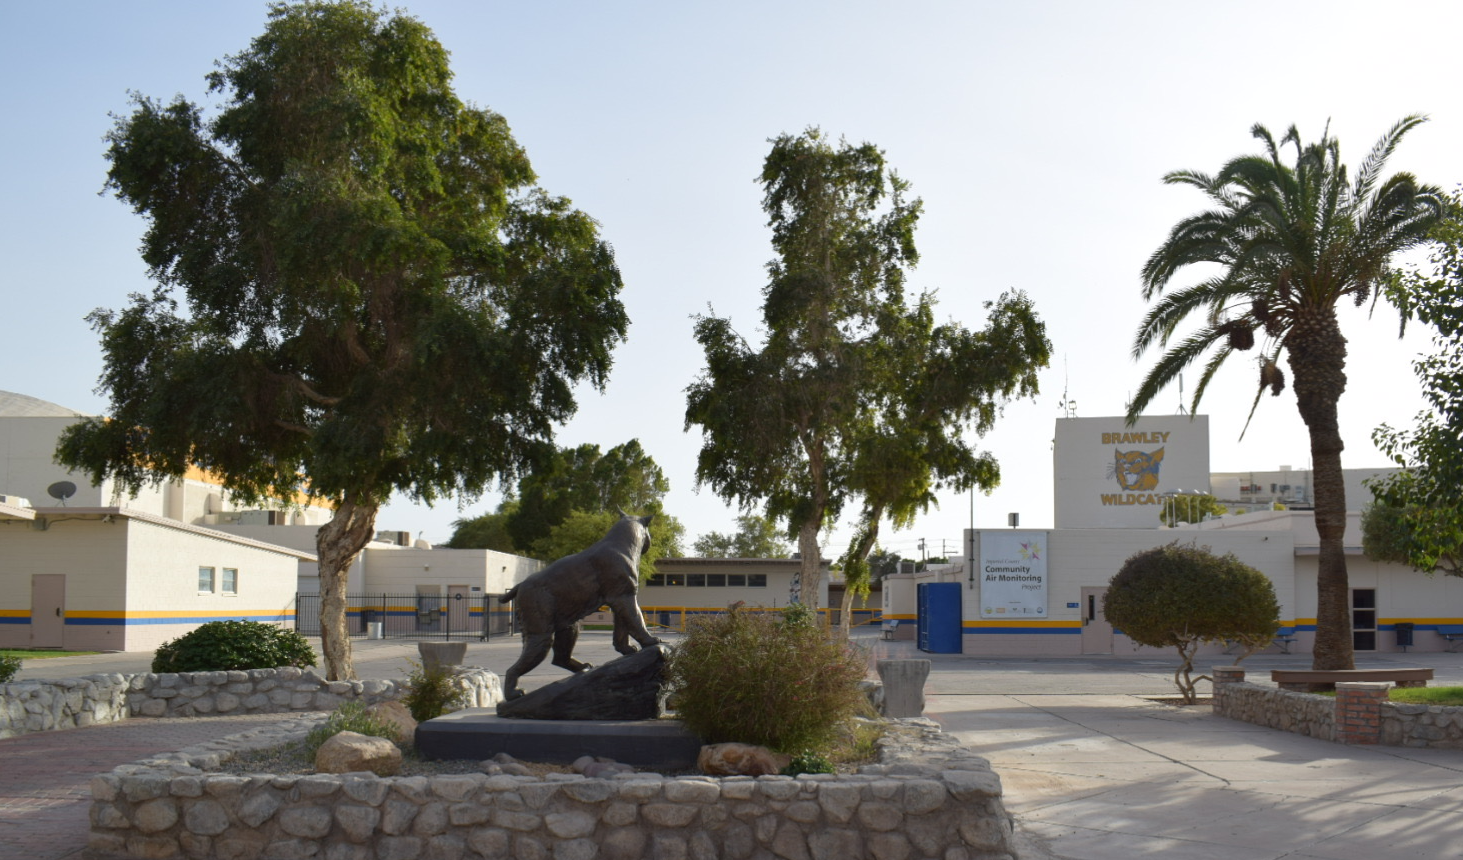 MIddle of BUHS campus, buildings and wildcat statue